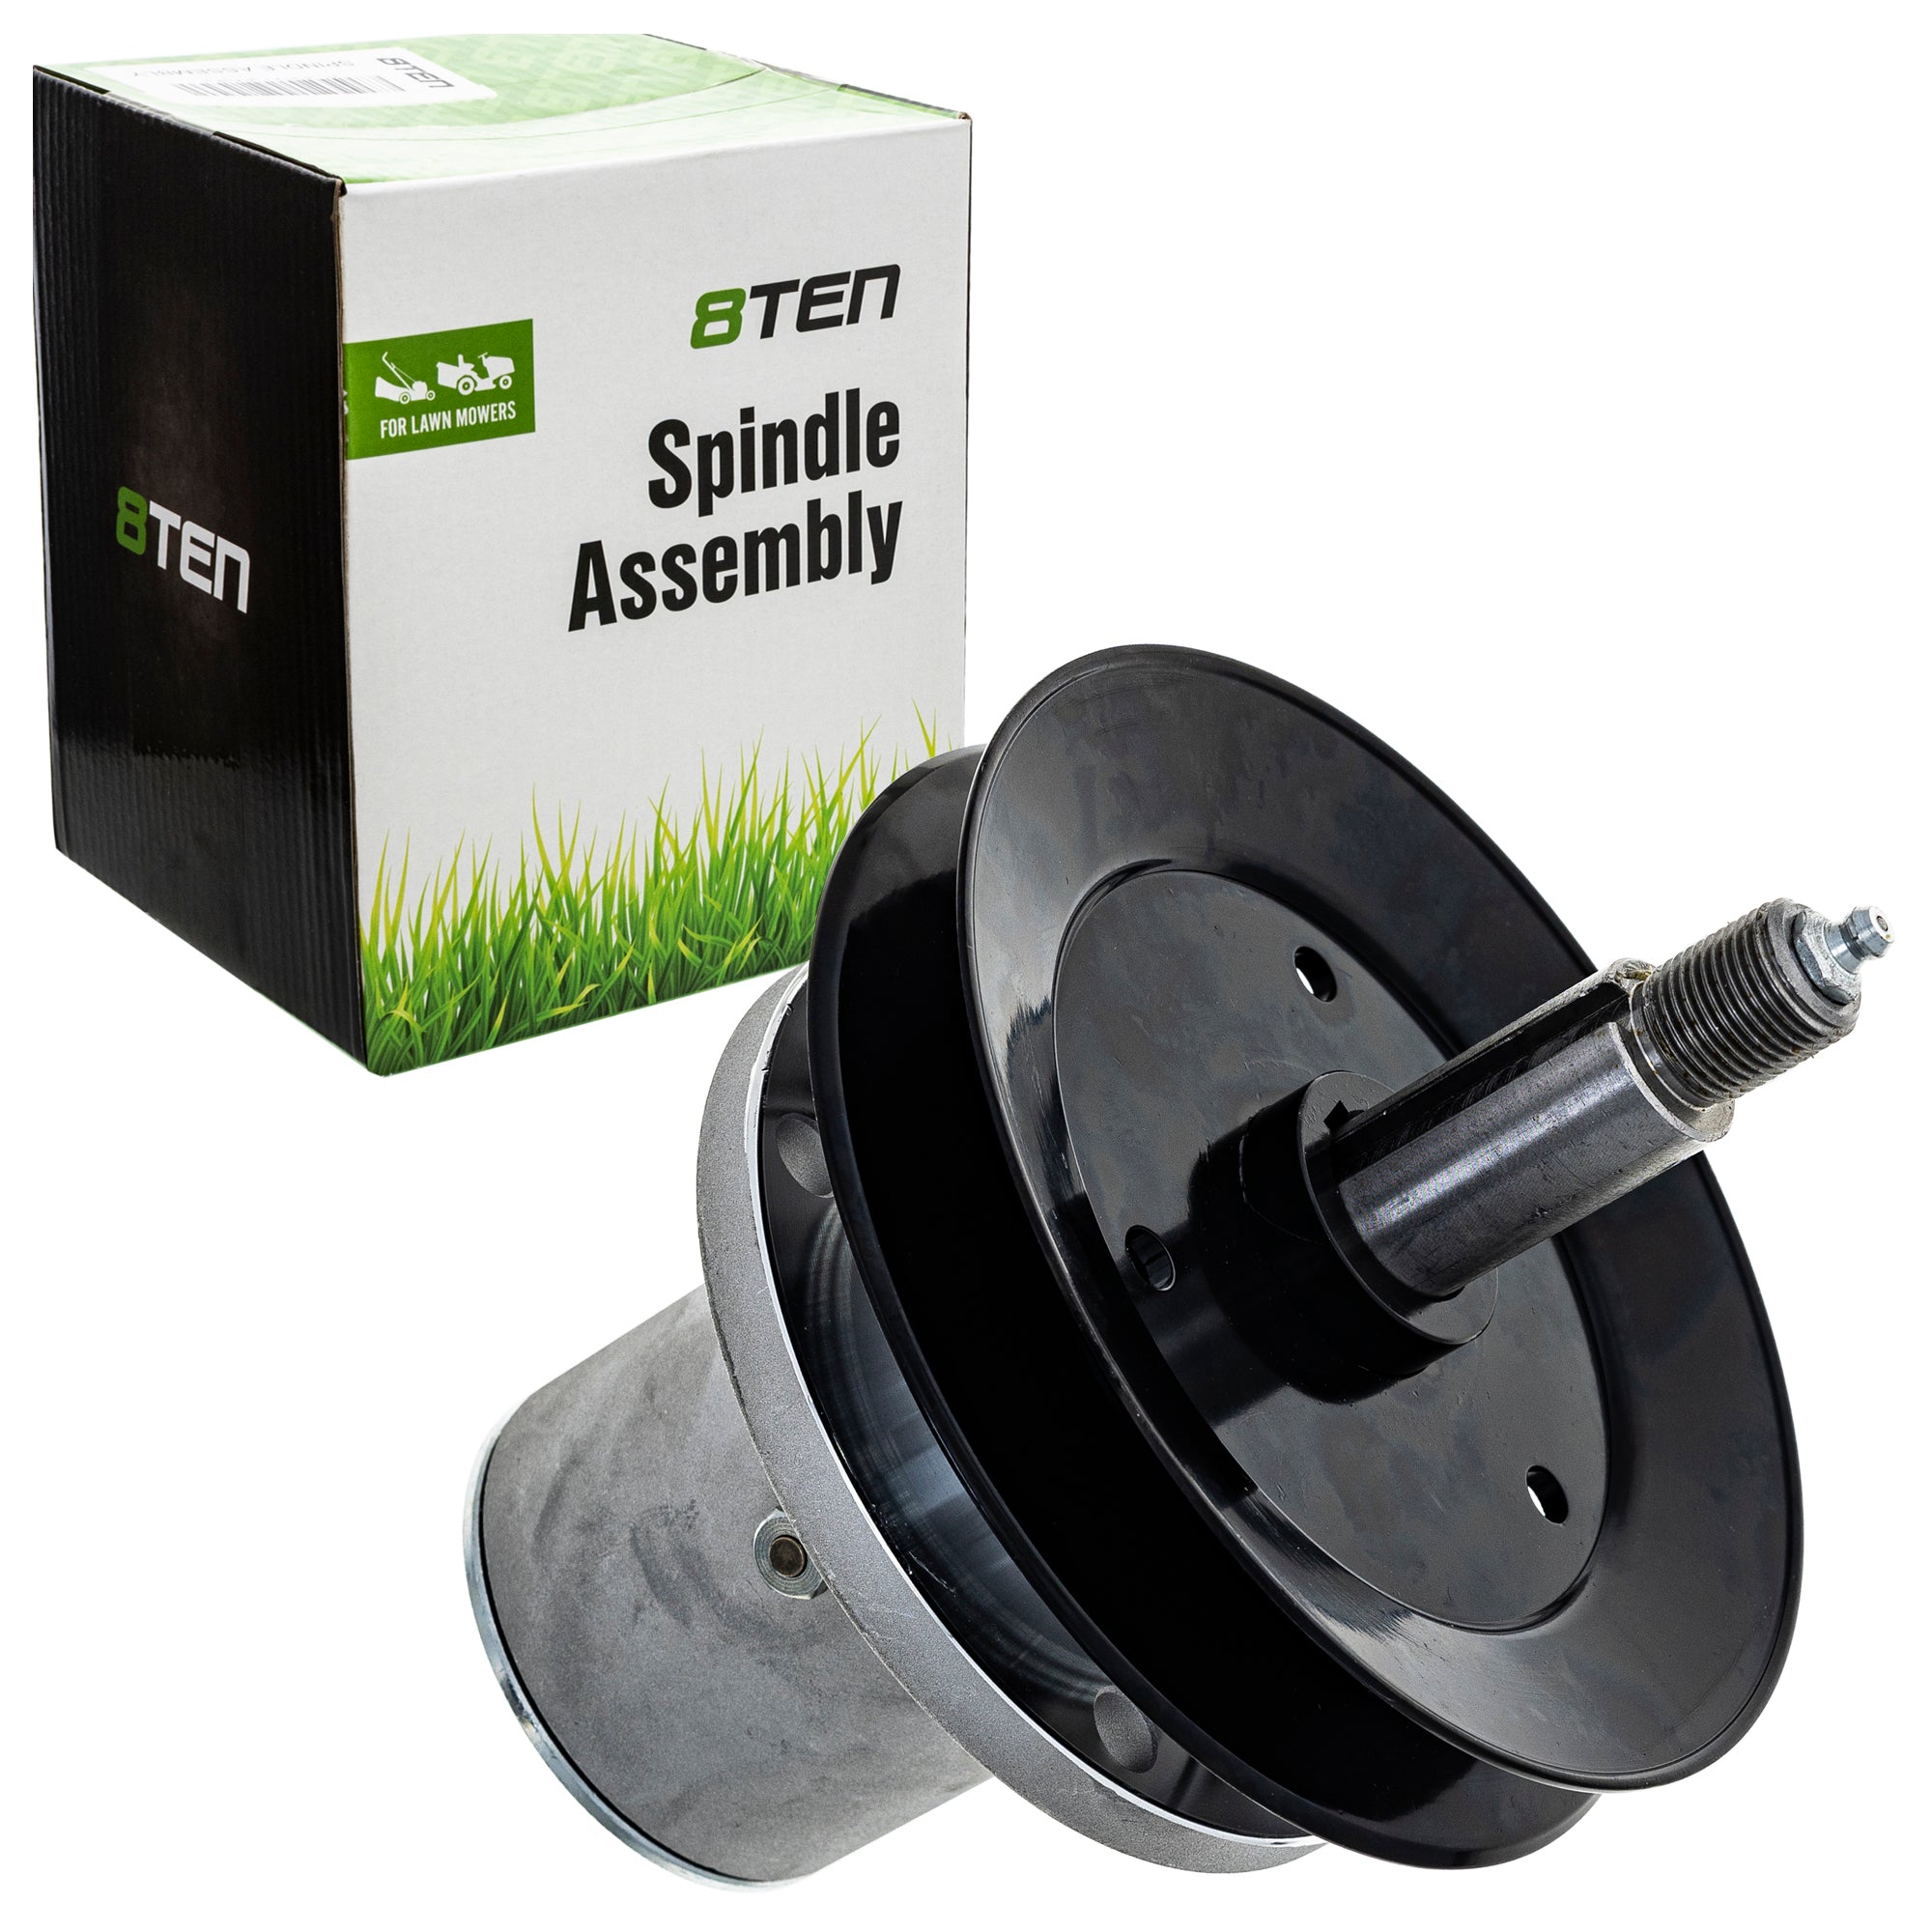 8TEN 810-CSP2392N Deck Spindle Set 3-Pack for IS2100Z